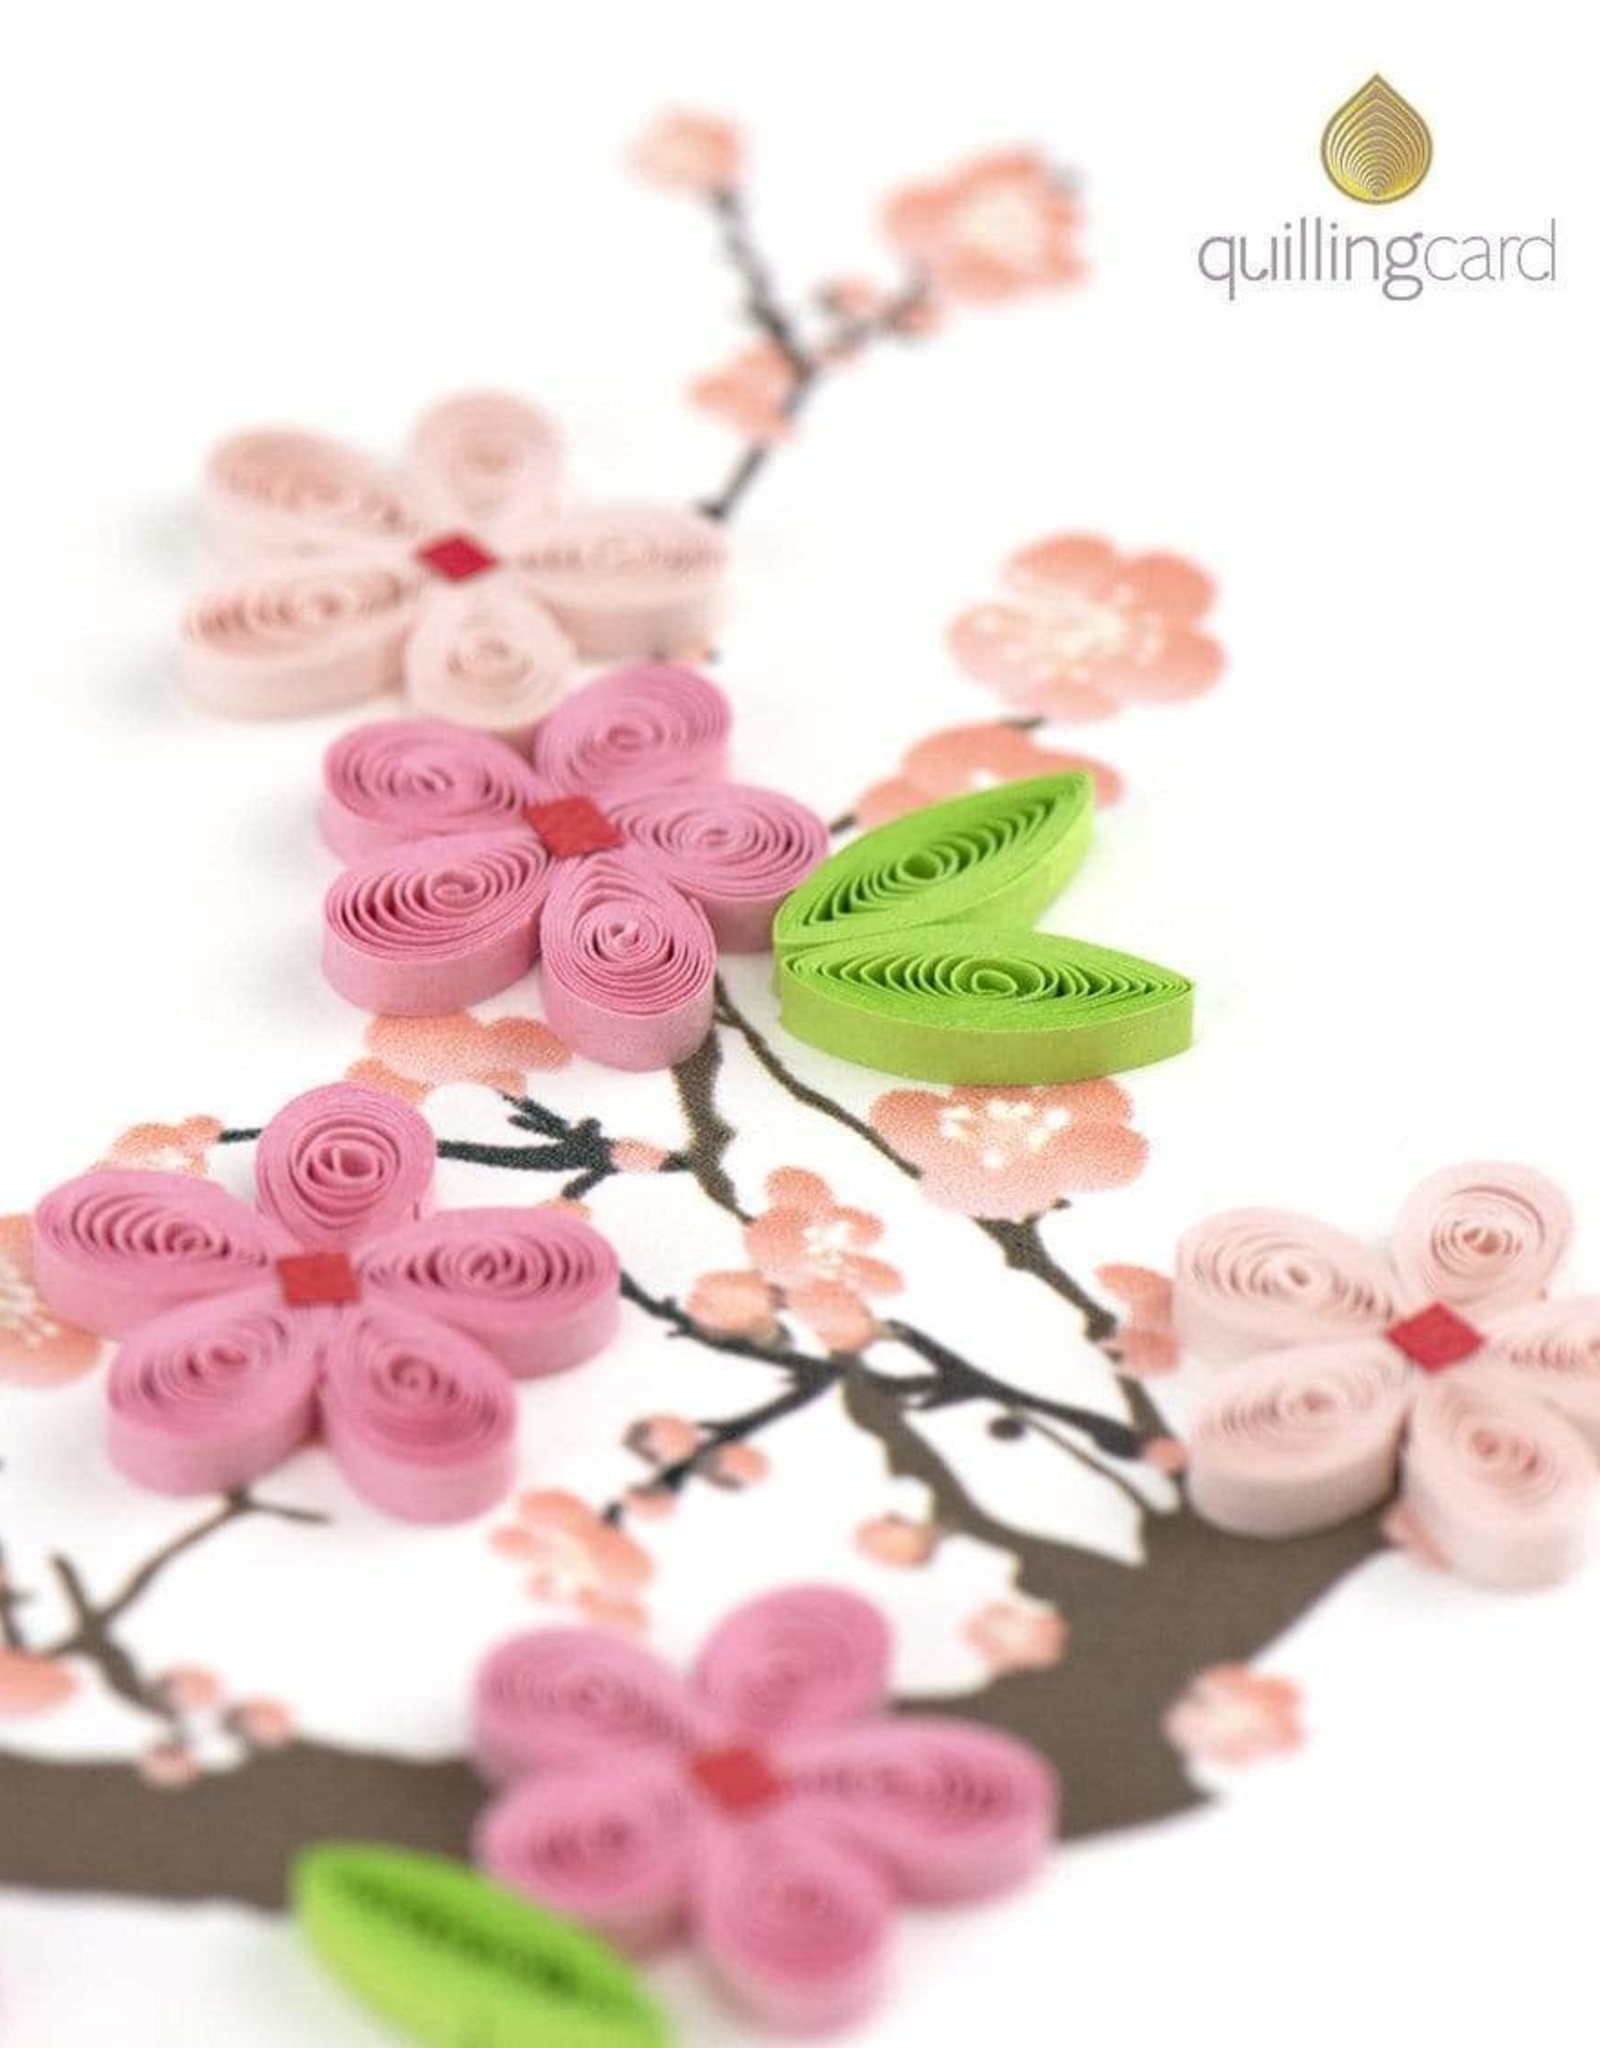 Quilling Card Quilled Cherry Blossom Card